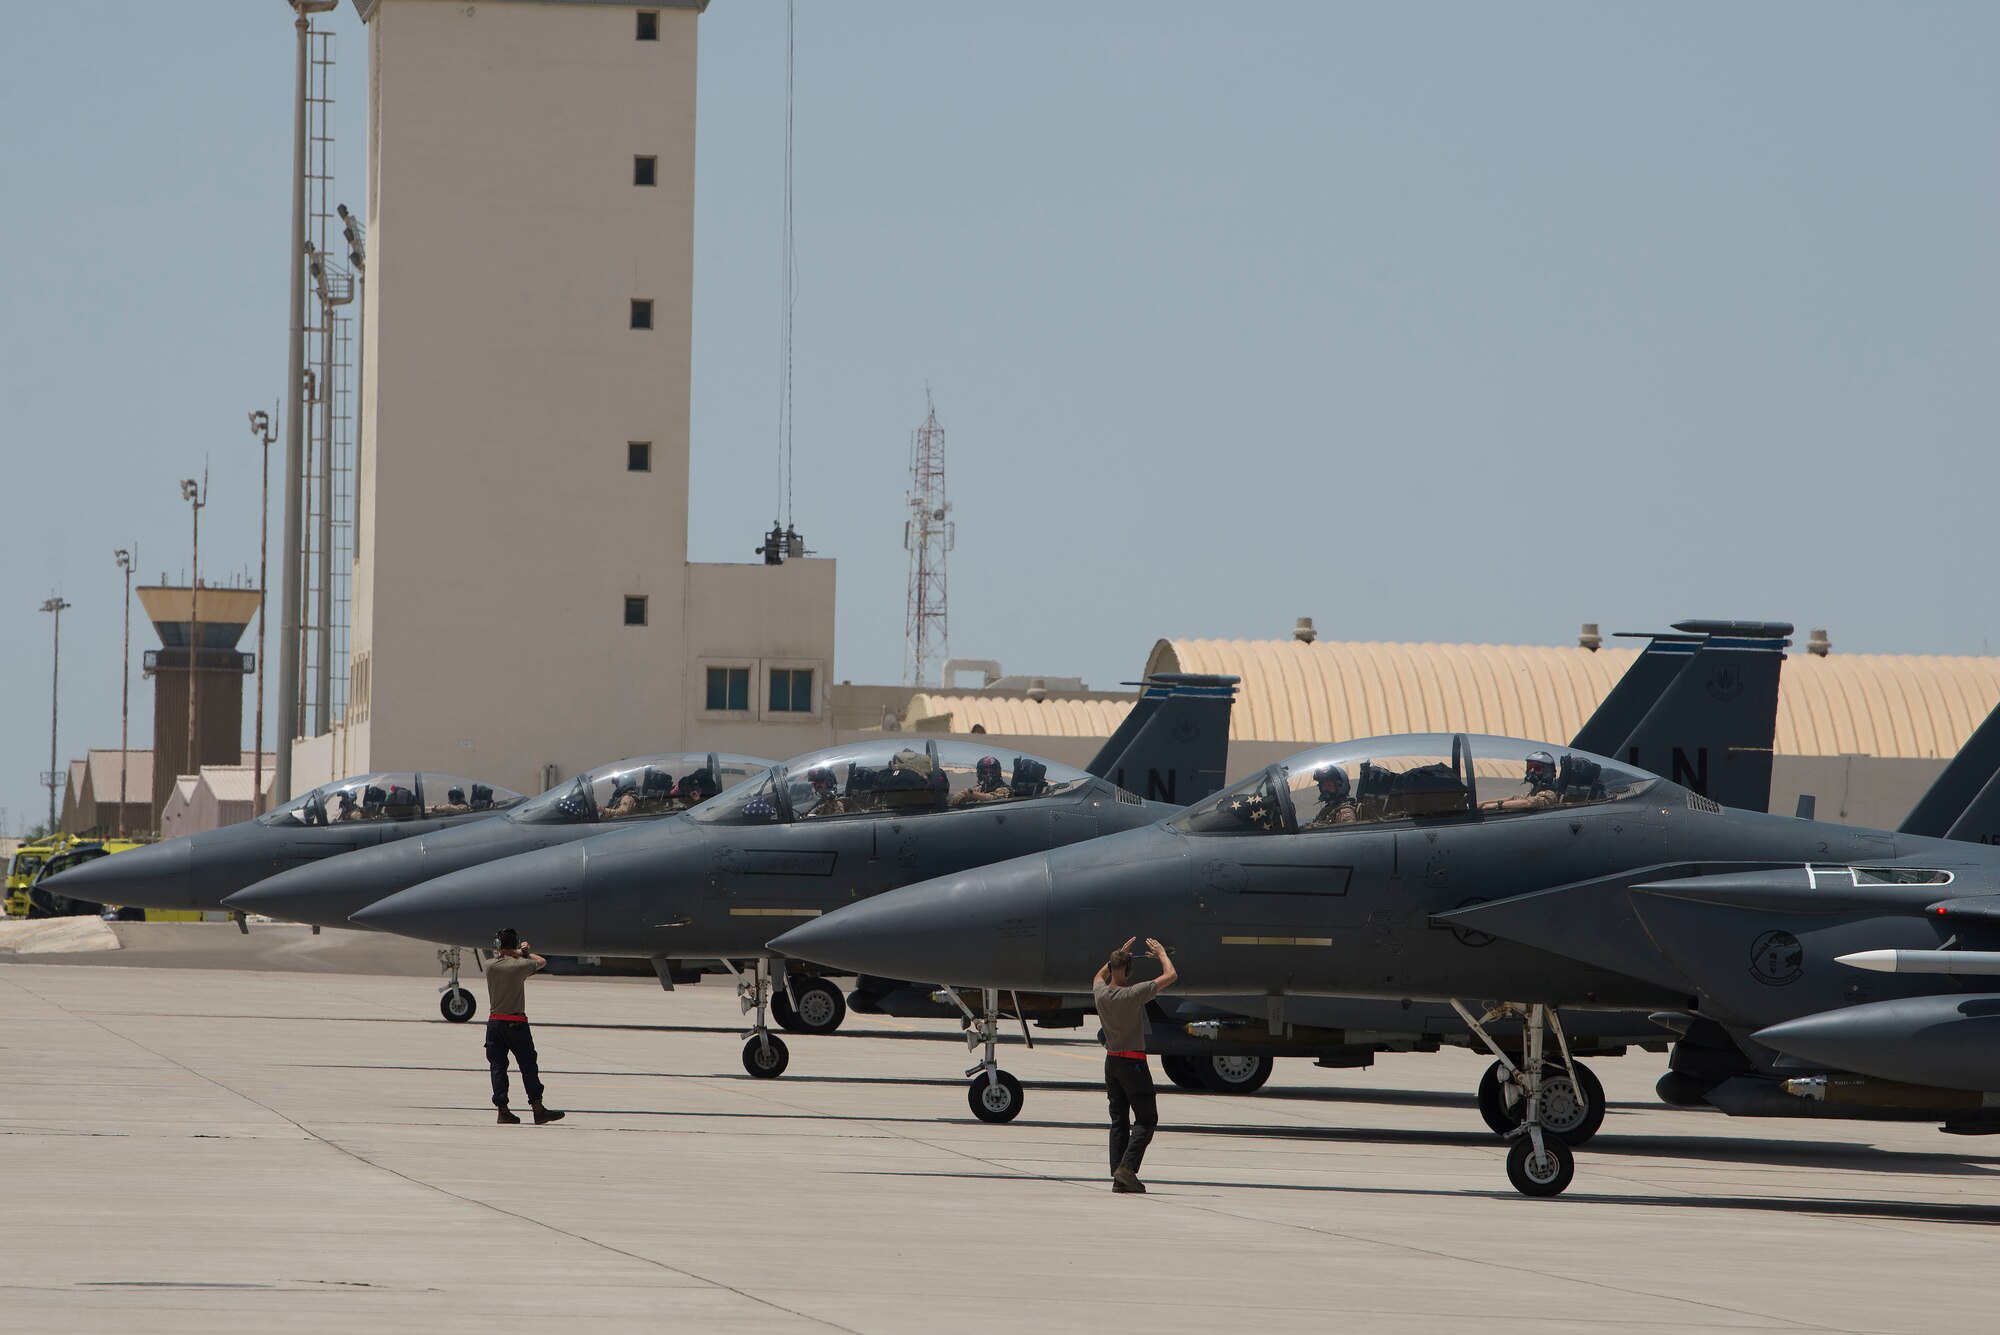 Four F-15E Strike Eagles assigned to the 494th Expeditionary Fighter Squadron (EFS) line up on the flightline at Al Dhafra Air Base, United Arab Emirates, April 25, 2021. Pilots and maintainers assigned to the 494th EFS, 332nd Air Expeditionary Wing executed the first combat tactical ferry mission as part of an Agile Combat Employment operation in a deployed theater. (U.S. Air Force photo by Staff Sgt. Zade Vadnais)